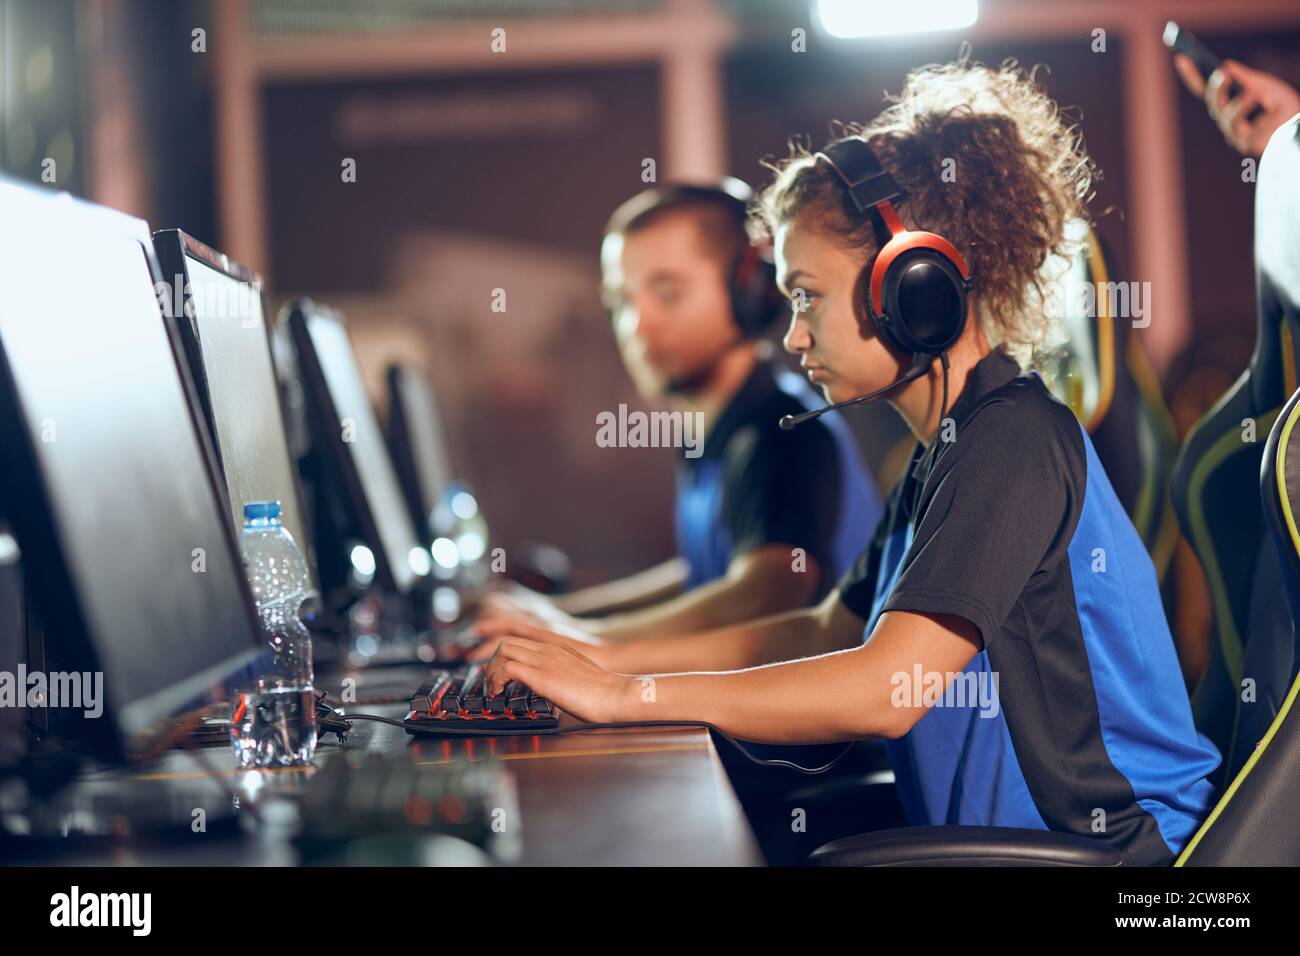 Team of professional teenage cyber sport gamers participating in eSports tournament, playing online video games Stock Photo